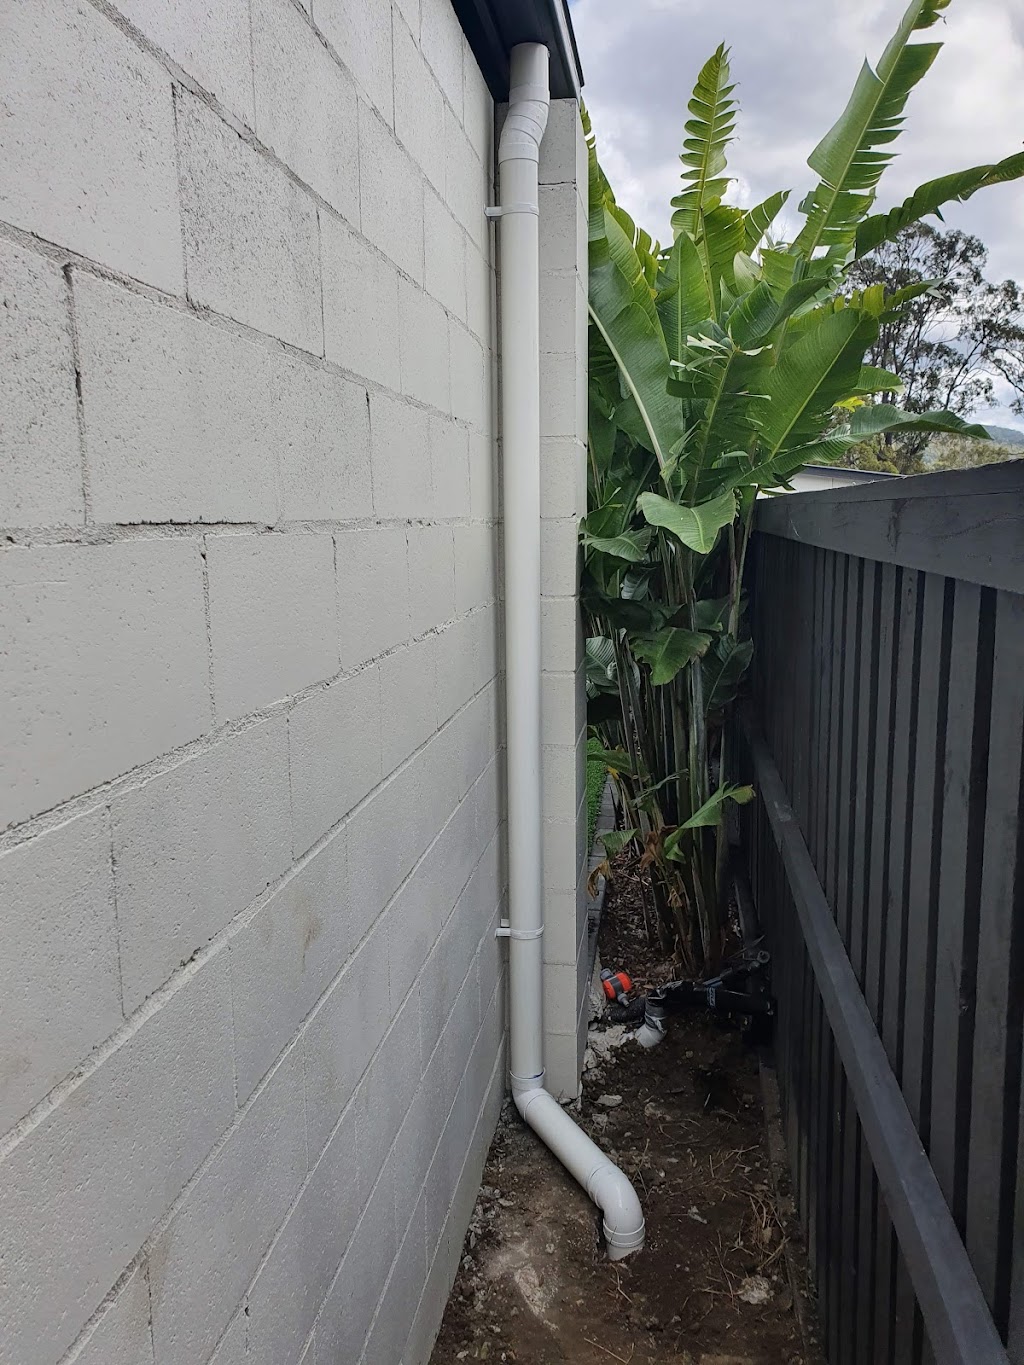 On Tap Plumbing and Gas Services | 13 Flinders St, Upper Kedron QLD 4055, Australia | Phone: 0428 642 869